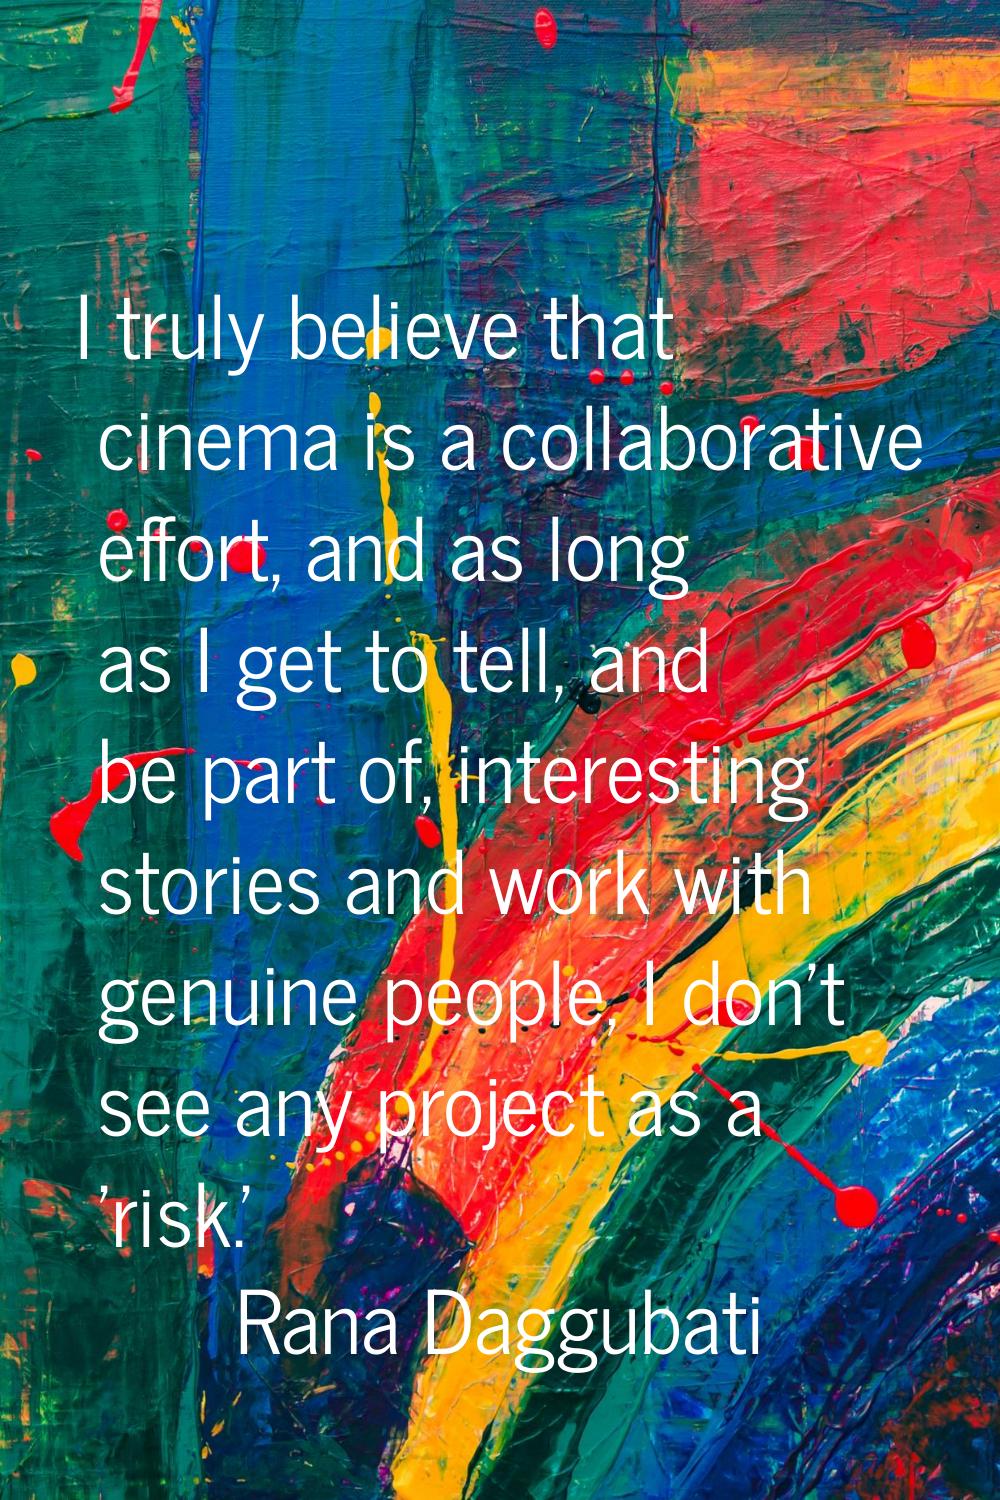 I truly believe that cinema is a collaborative effort, and as long as I get to tell, and be part of